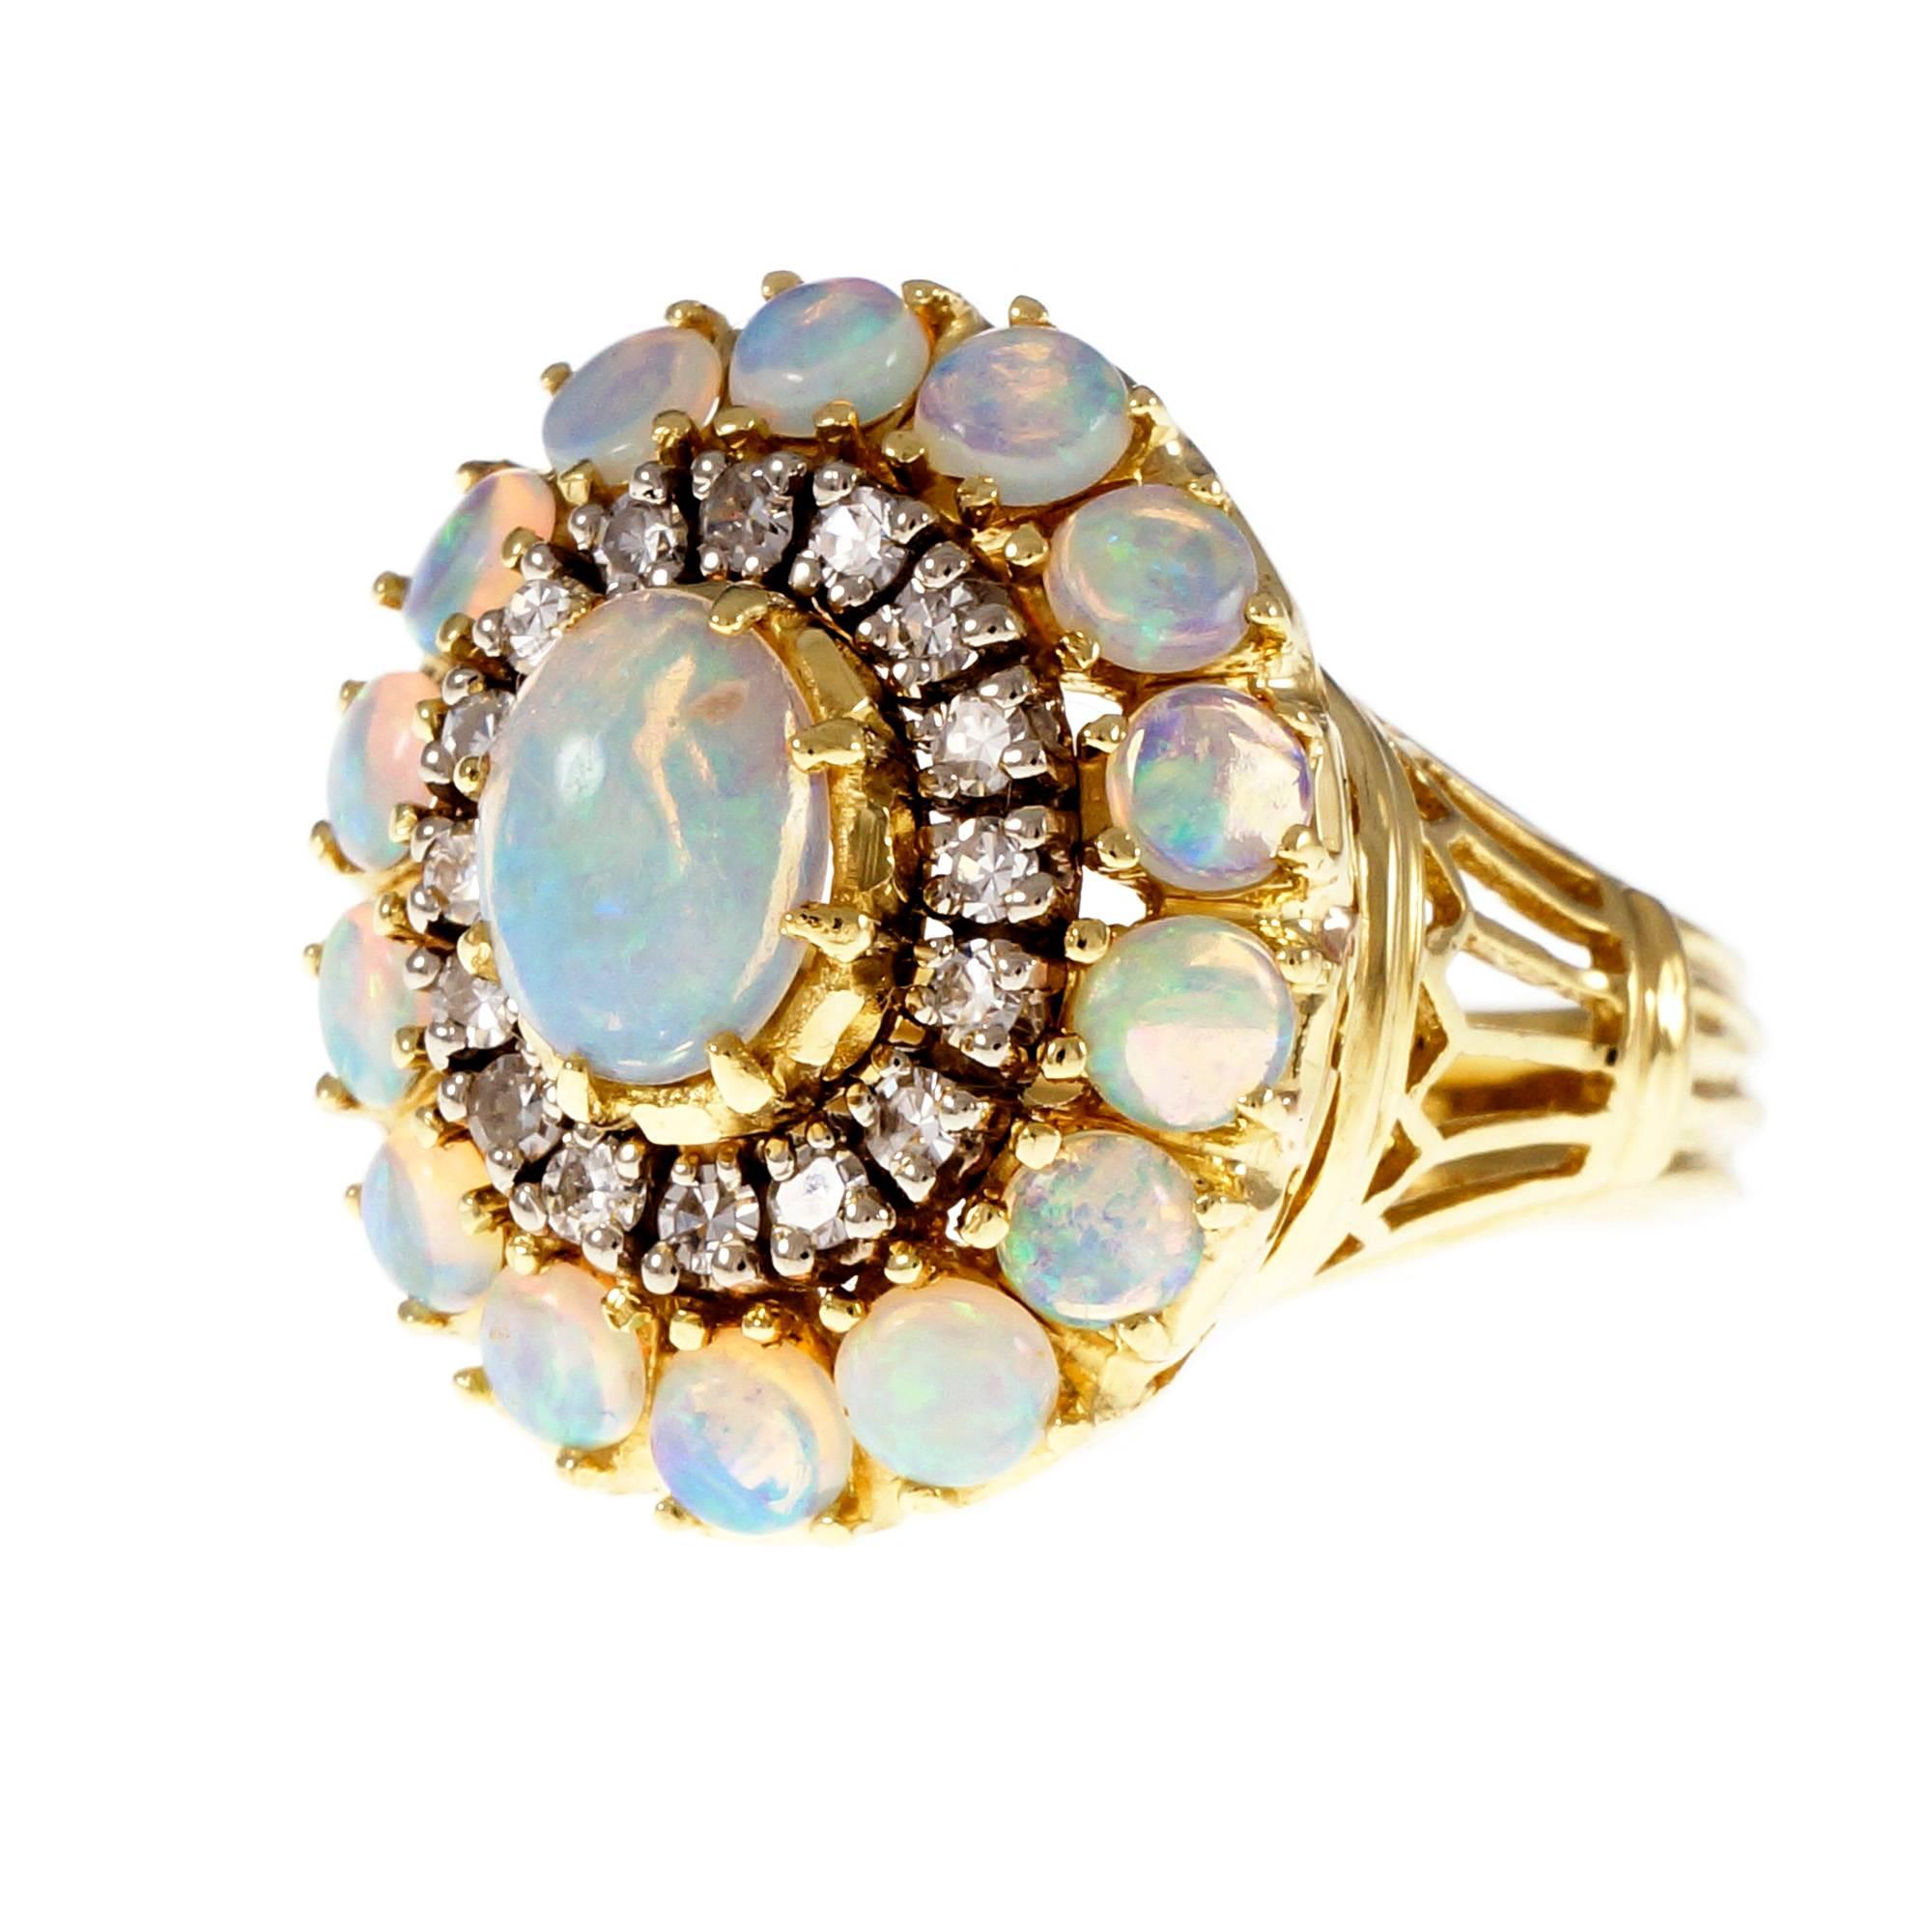 1950’s 18k yellow gold domed cocktail ring with top gem blue green Opals and  full cut Diamonds.

1 oval cabochon blue green translucent Opal, approx. total weight .75cts, 7.75 x 5.84mm
16 round Diamonds, approx. total weight .33cts, H, SI1
14 round